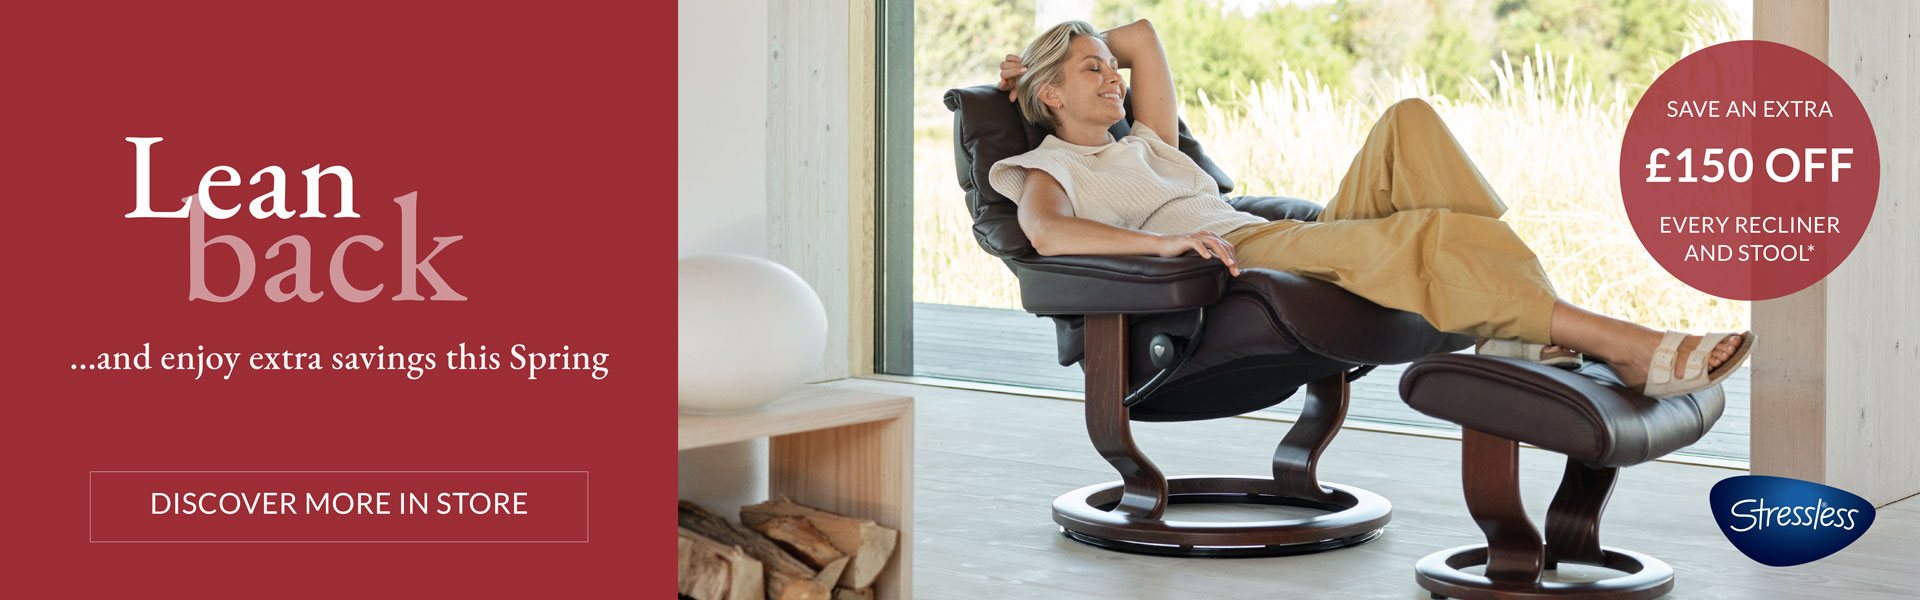 Stressless Spring Offer Recliners